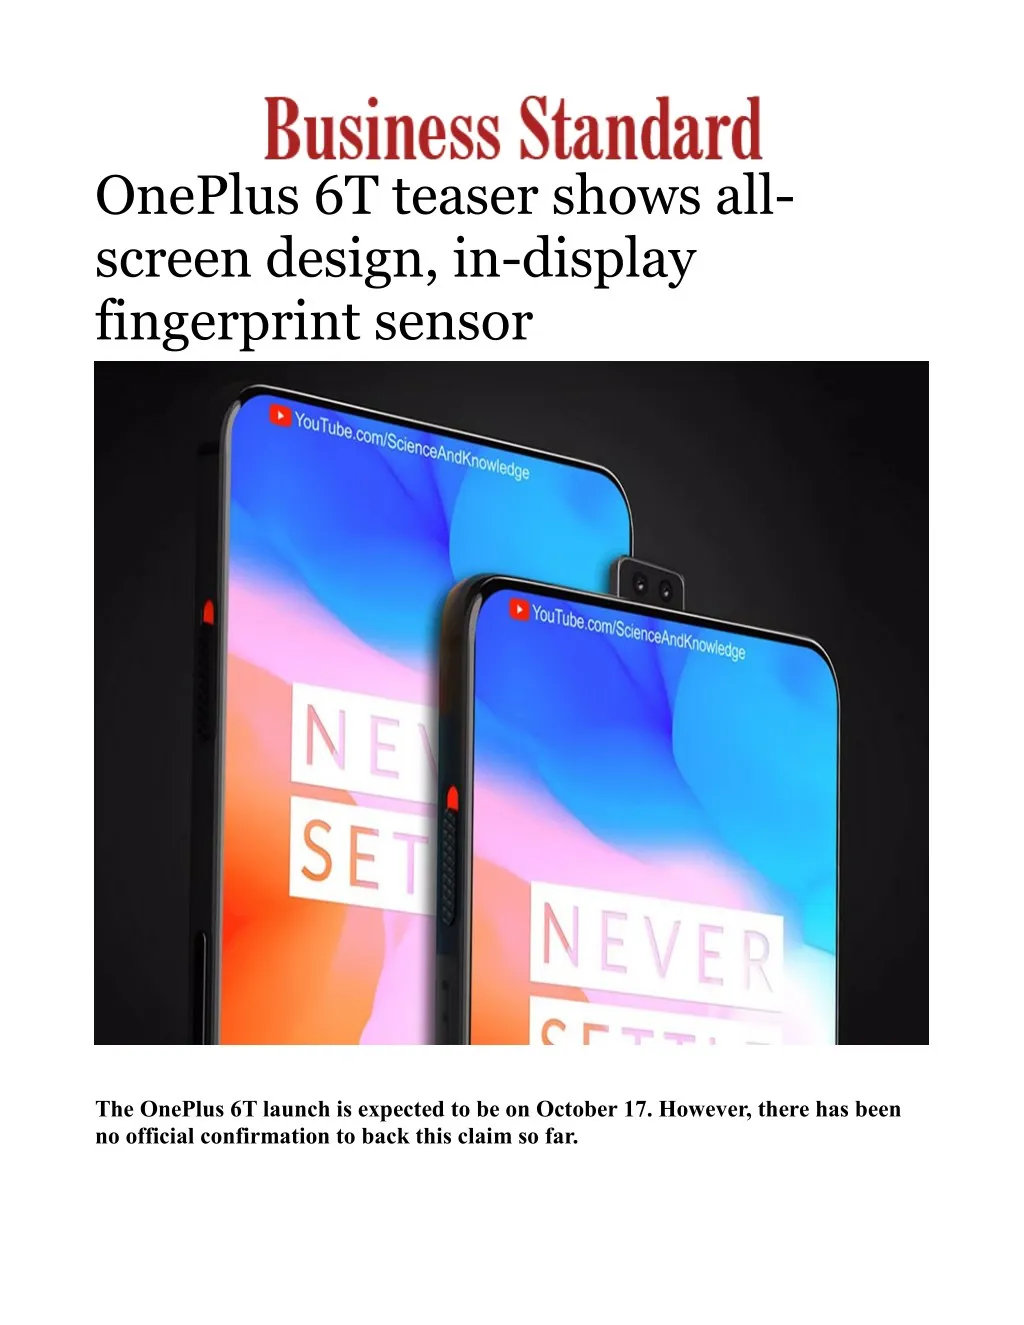 oneplus 6t teaser shows all screen design